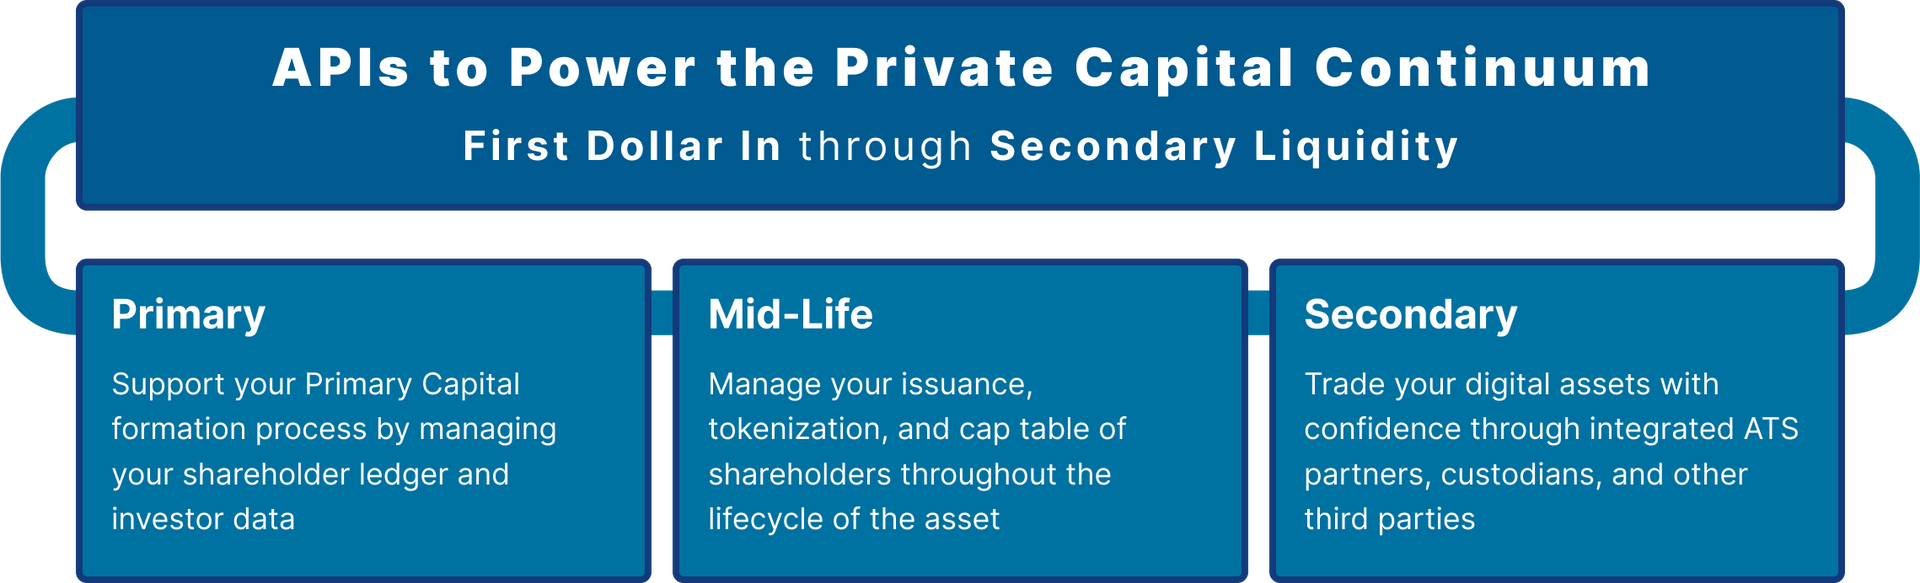 APIs to Power the Private Capital Continuum